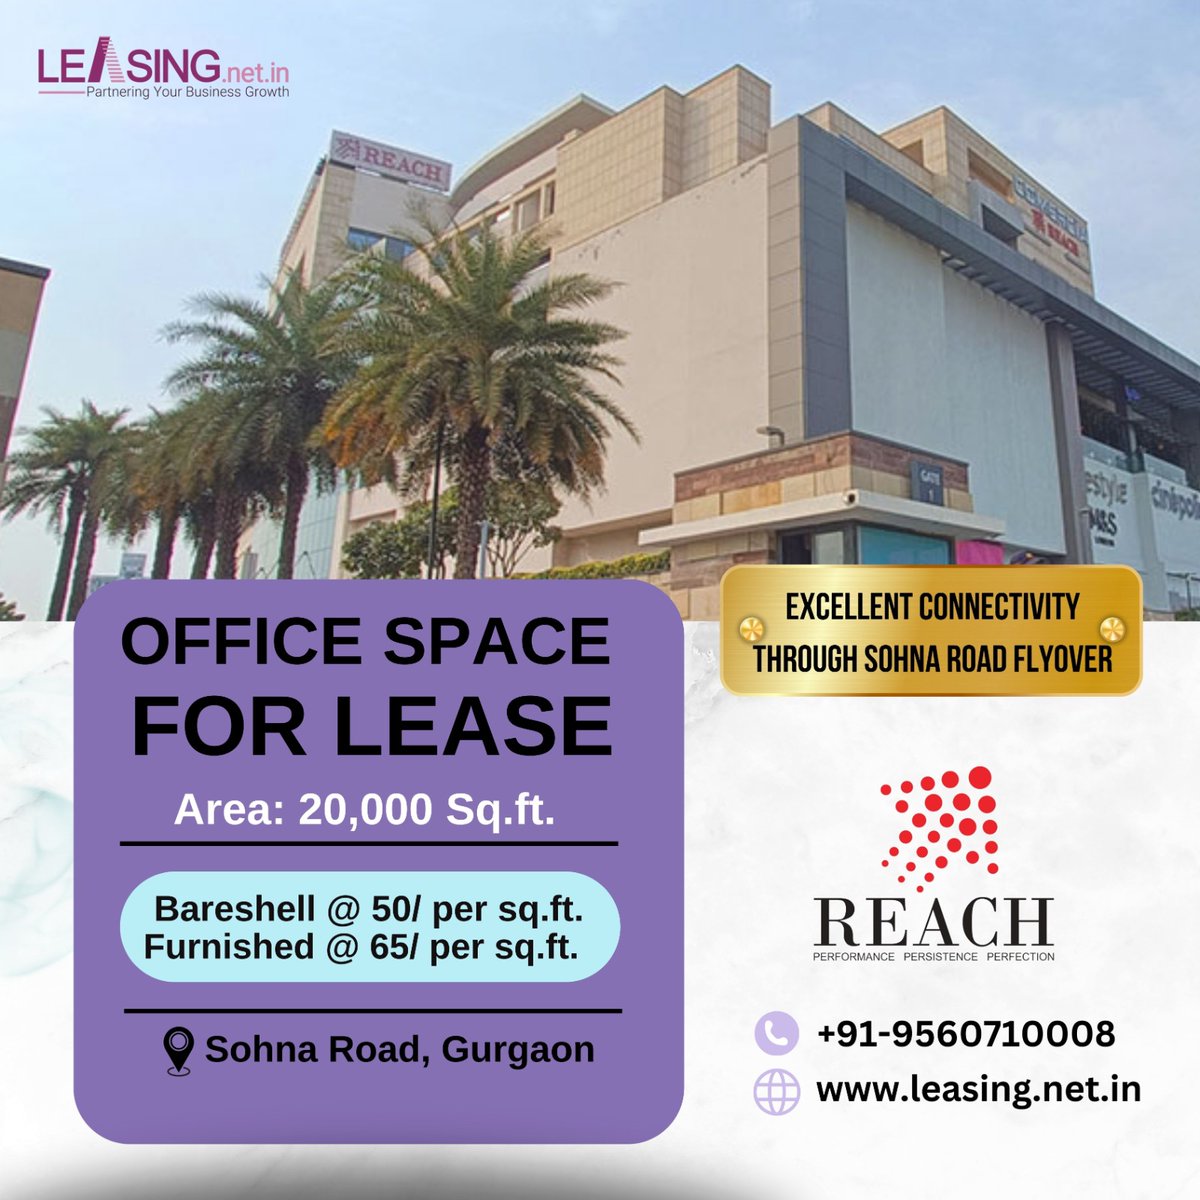 AVAILABLE FOR SALE AT PRIME LOCATION OF GURGAON

In reach commercia, Sohna Road 
Area: 22000 Sq.Ft.
Sector - Sohna Road, Gurgaon

#leasing #commercial #vatika #leasespace #office #space #best #location